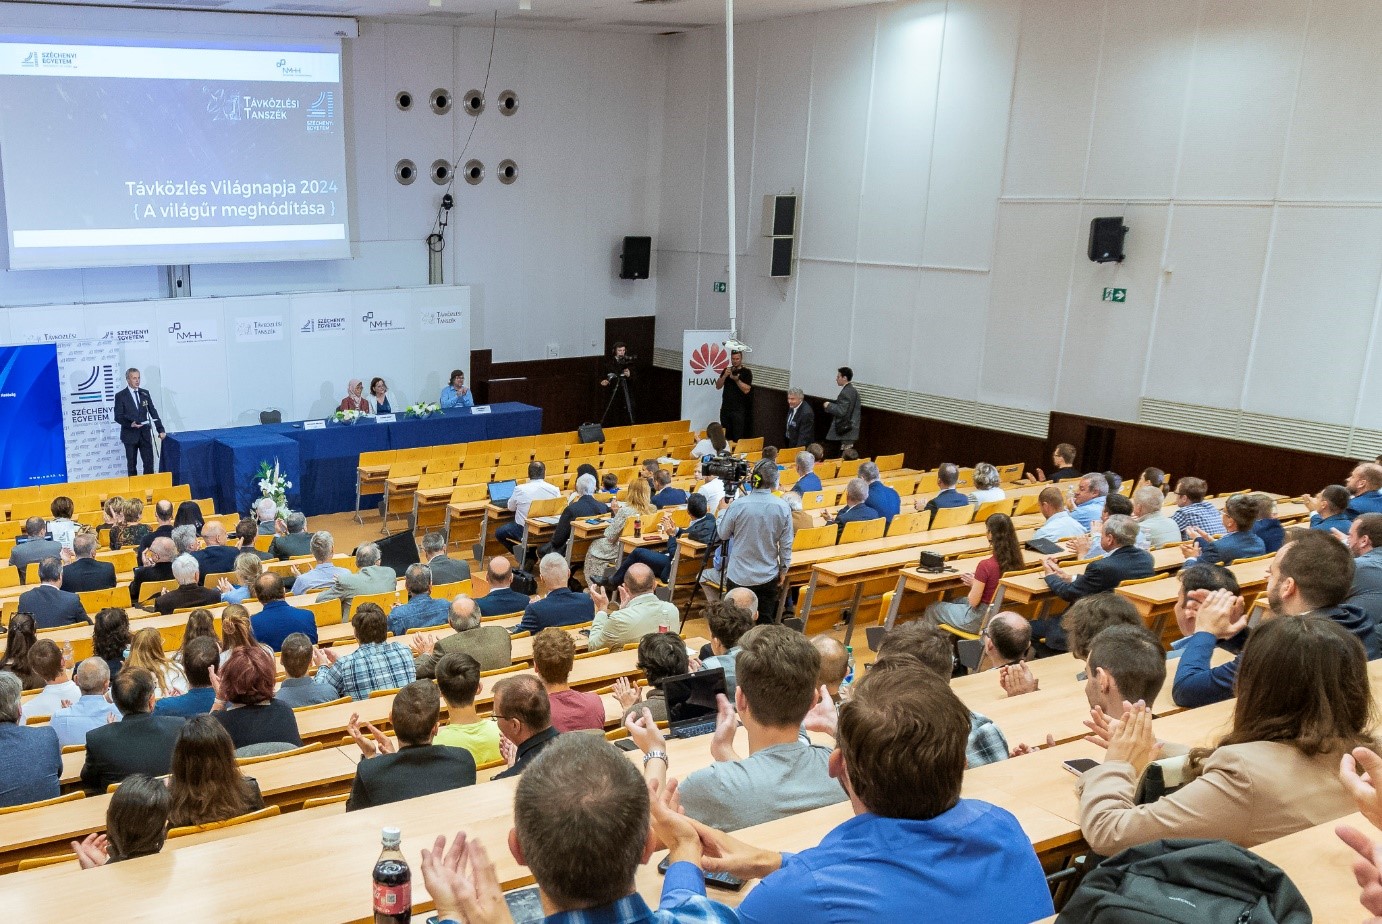 The World Telecommunications Day conference is held every year on the campus of Széchenyi István University in Győr